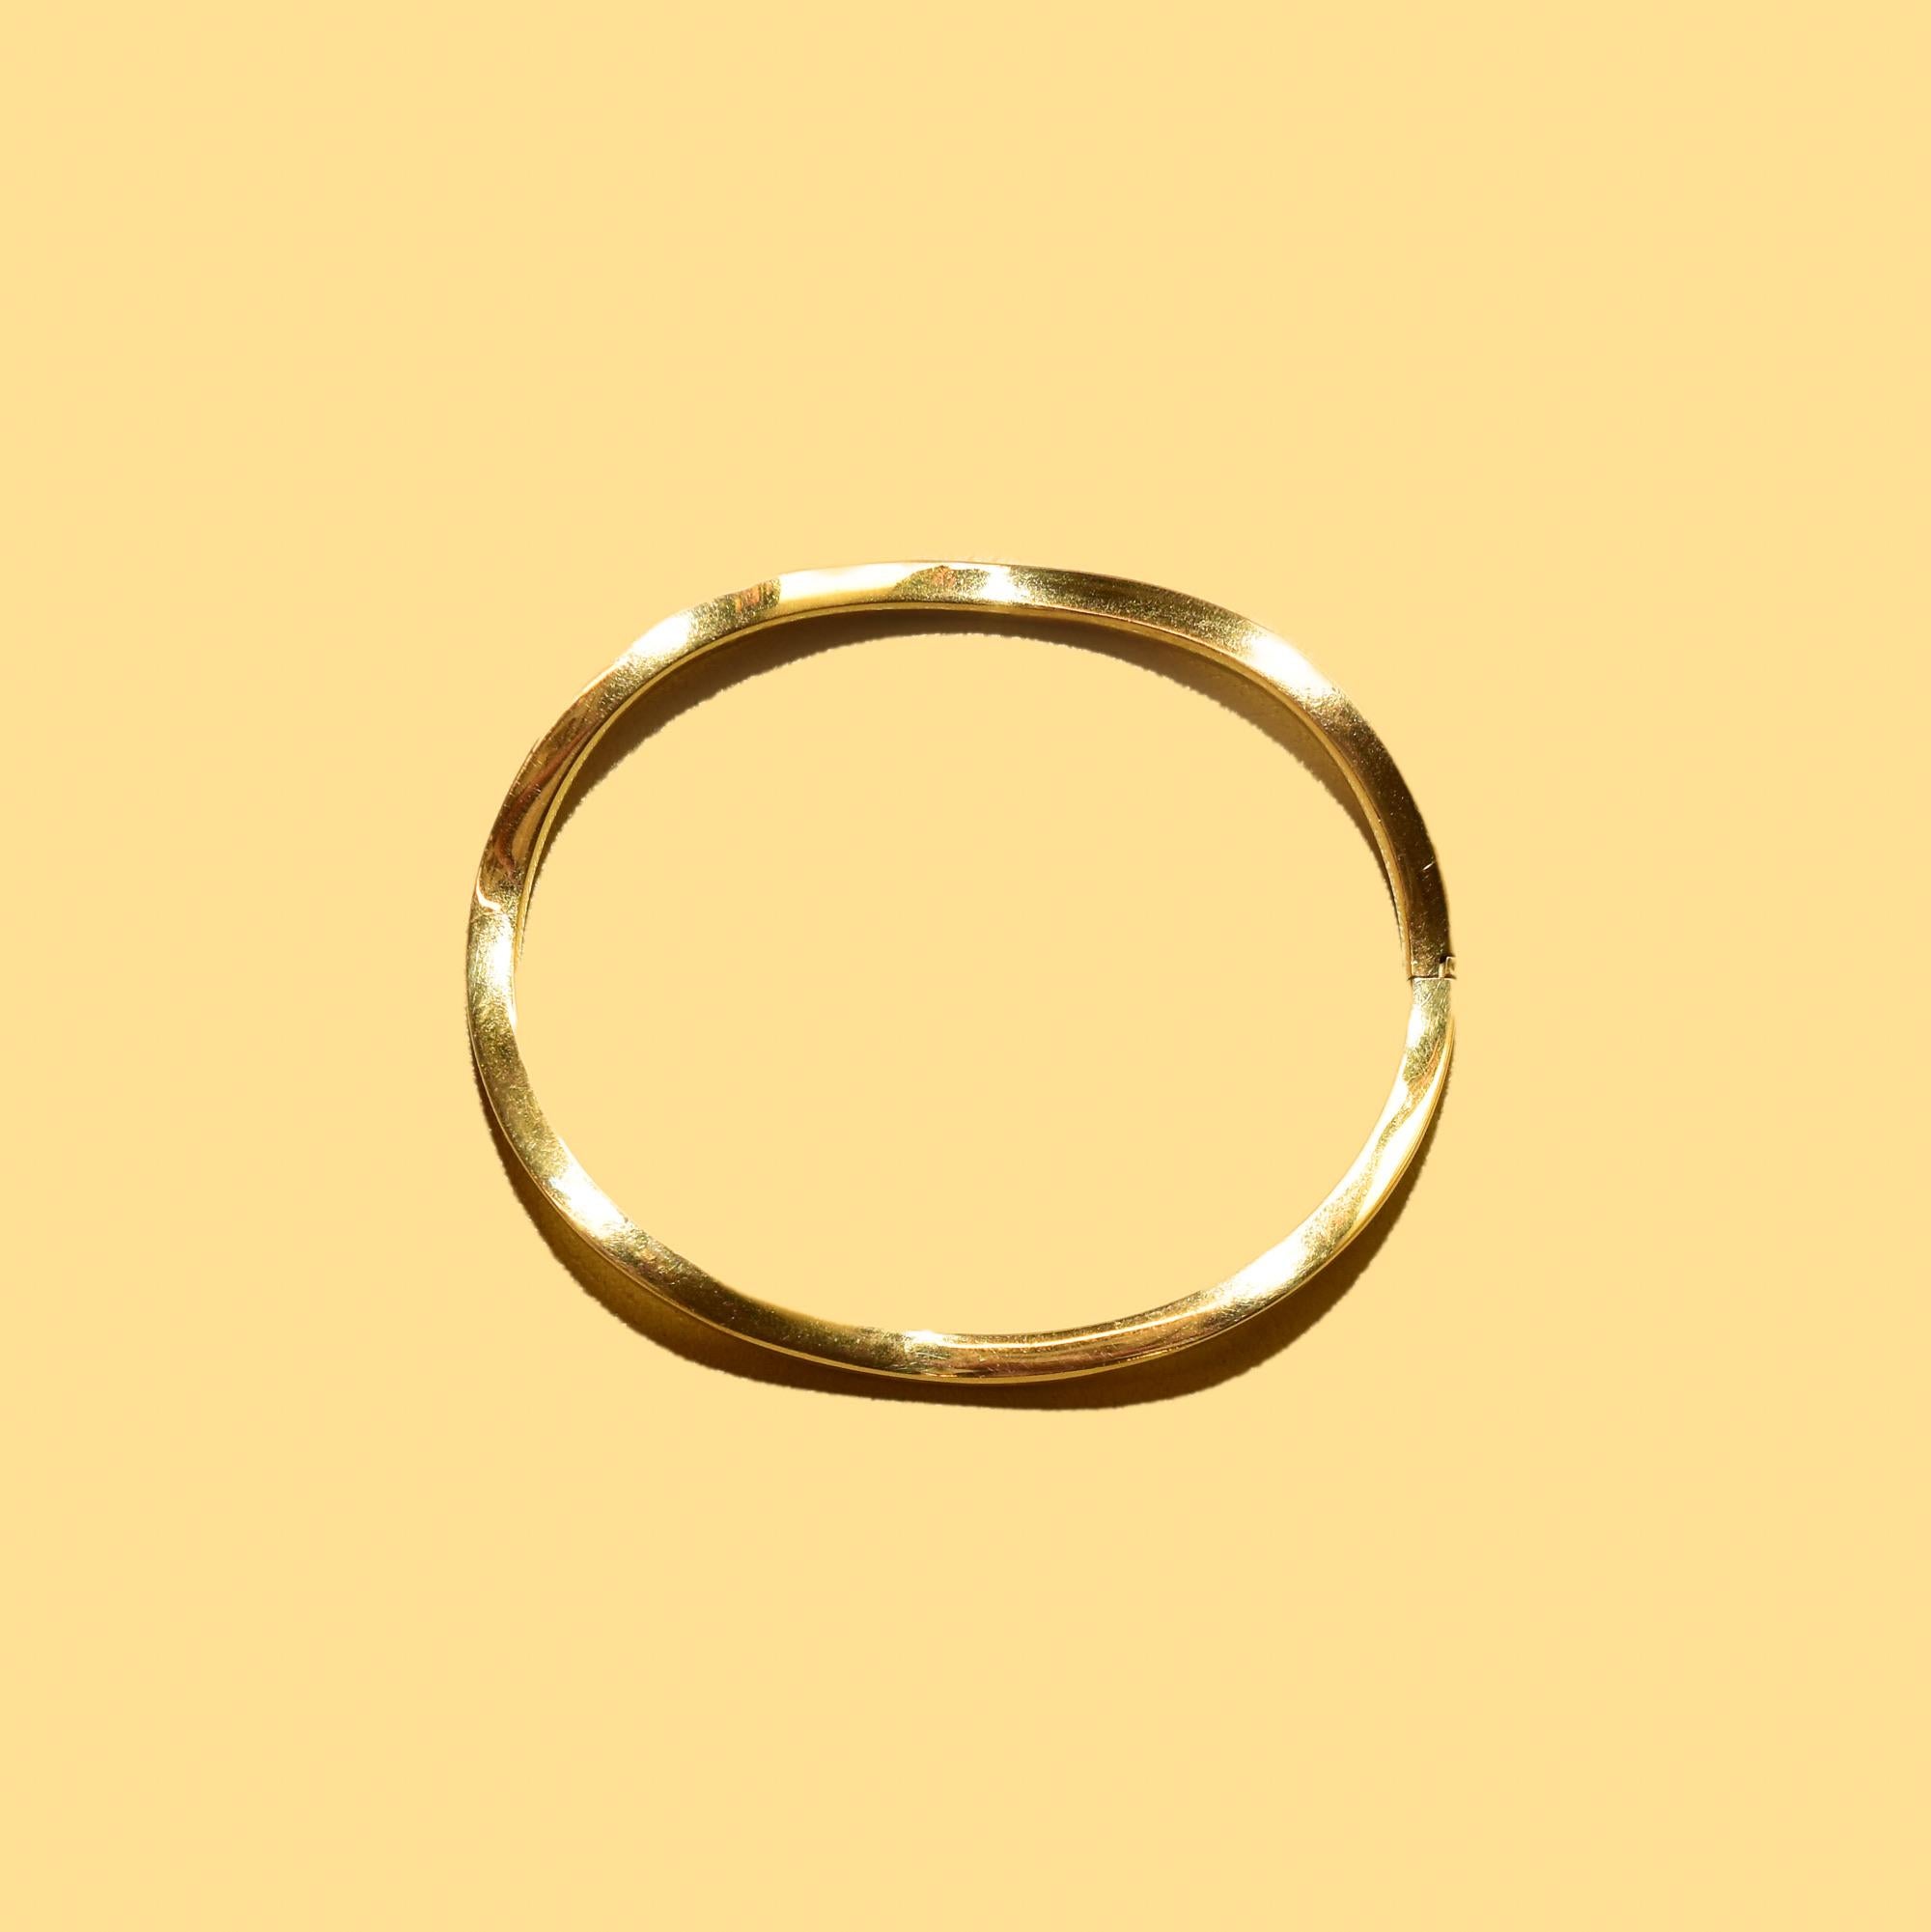 A rare vintage Tiffany & Co. Italy 18k wavy bangle bracelet in wonderful design, and great cosmetic condition. A great addition to any jewelry collection.

Features a 5mm yellow gold closed design cuff with a subtle waved shape, sleek hardware, and